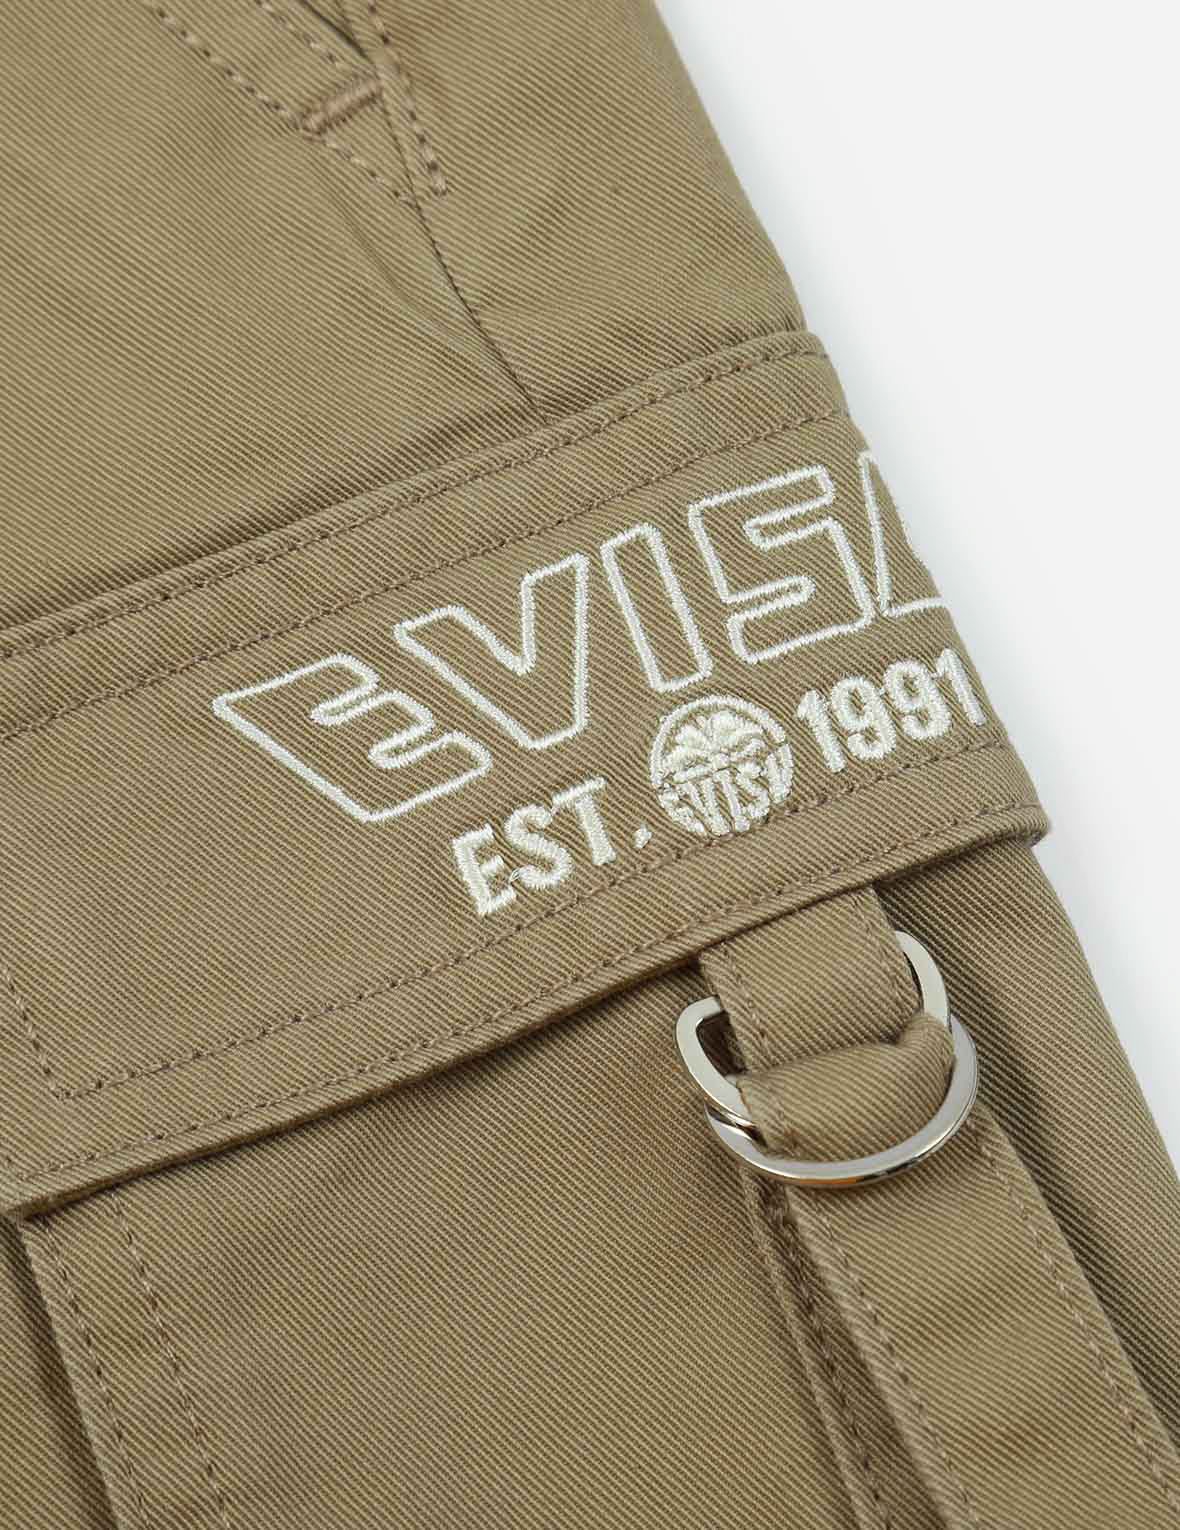 SEAGULL AND LOGO EMBROIDERY CARGO SHORTS - 7